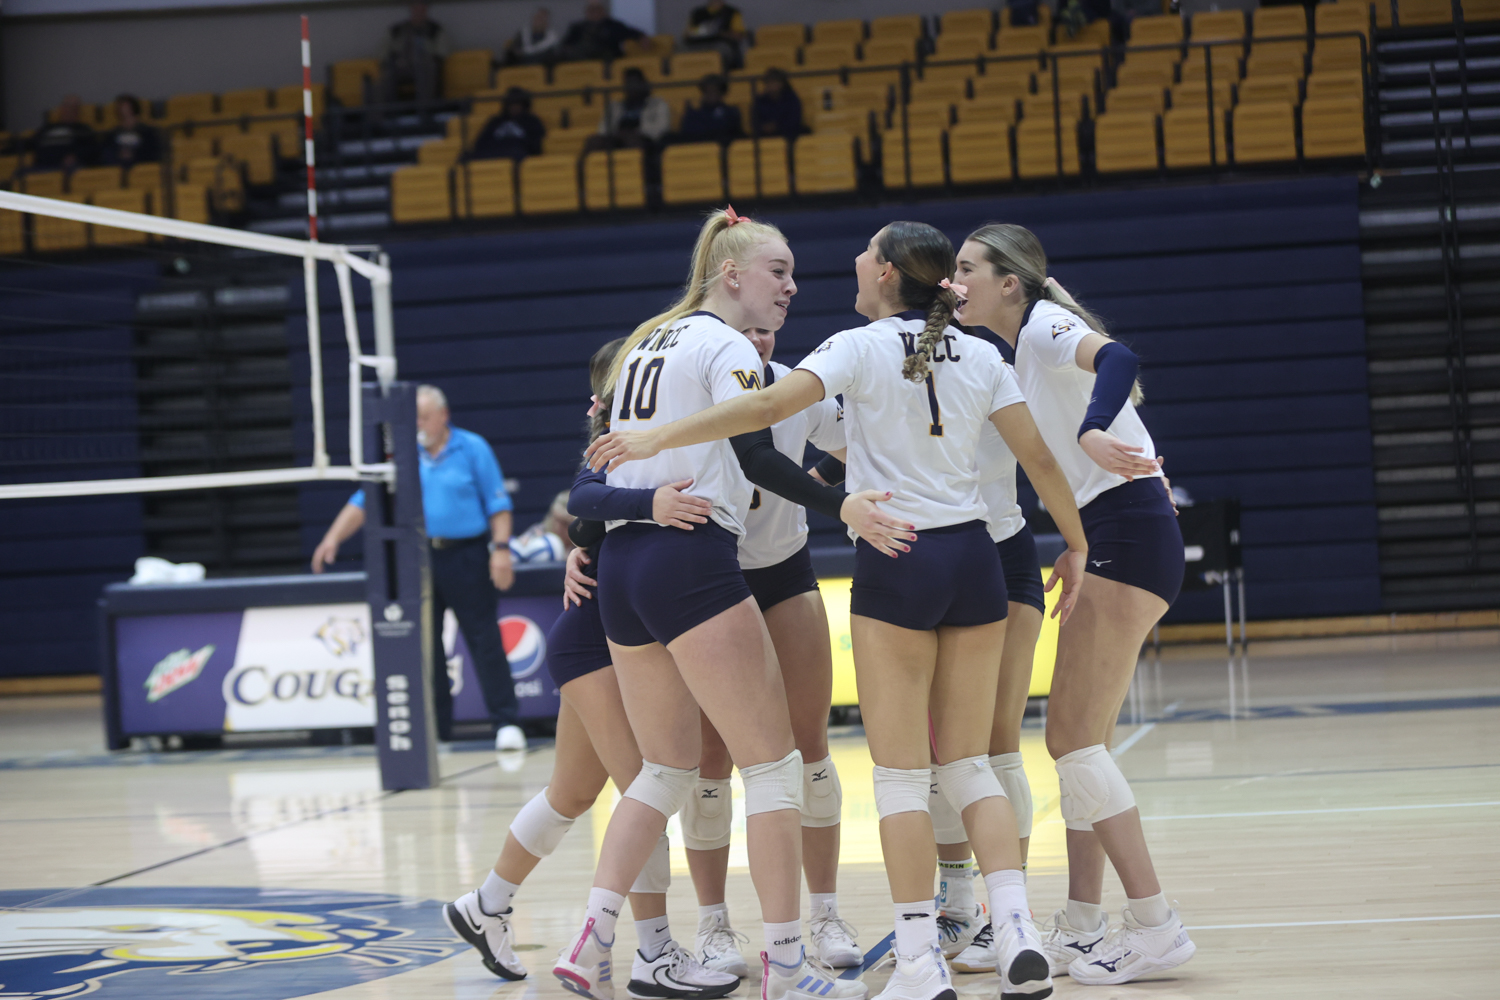 WNCC celebrates a point against Trinidad State in their first meeting of the season.